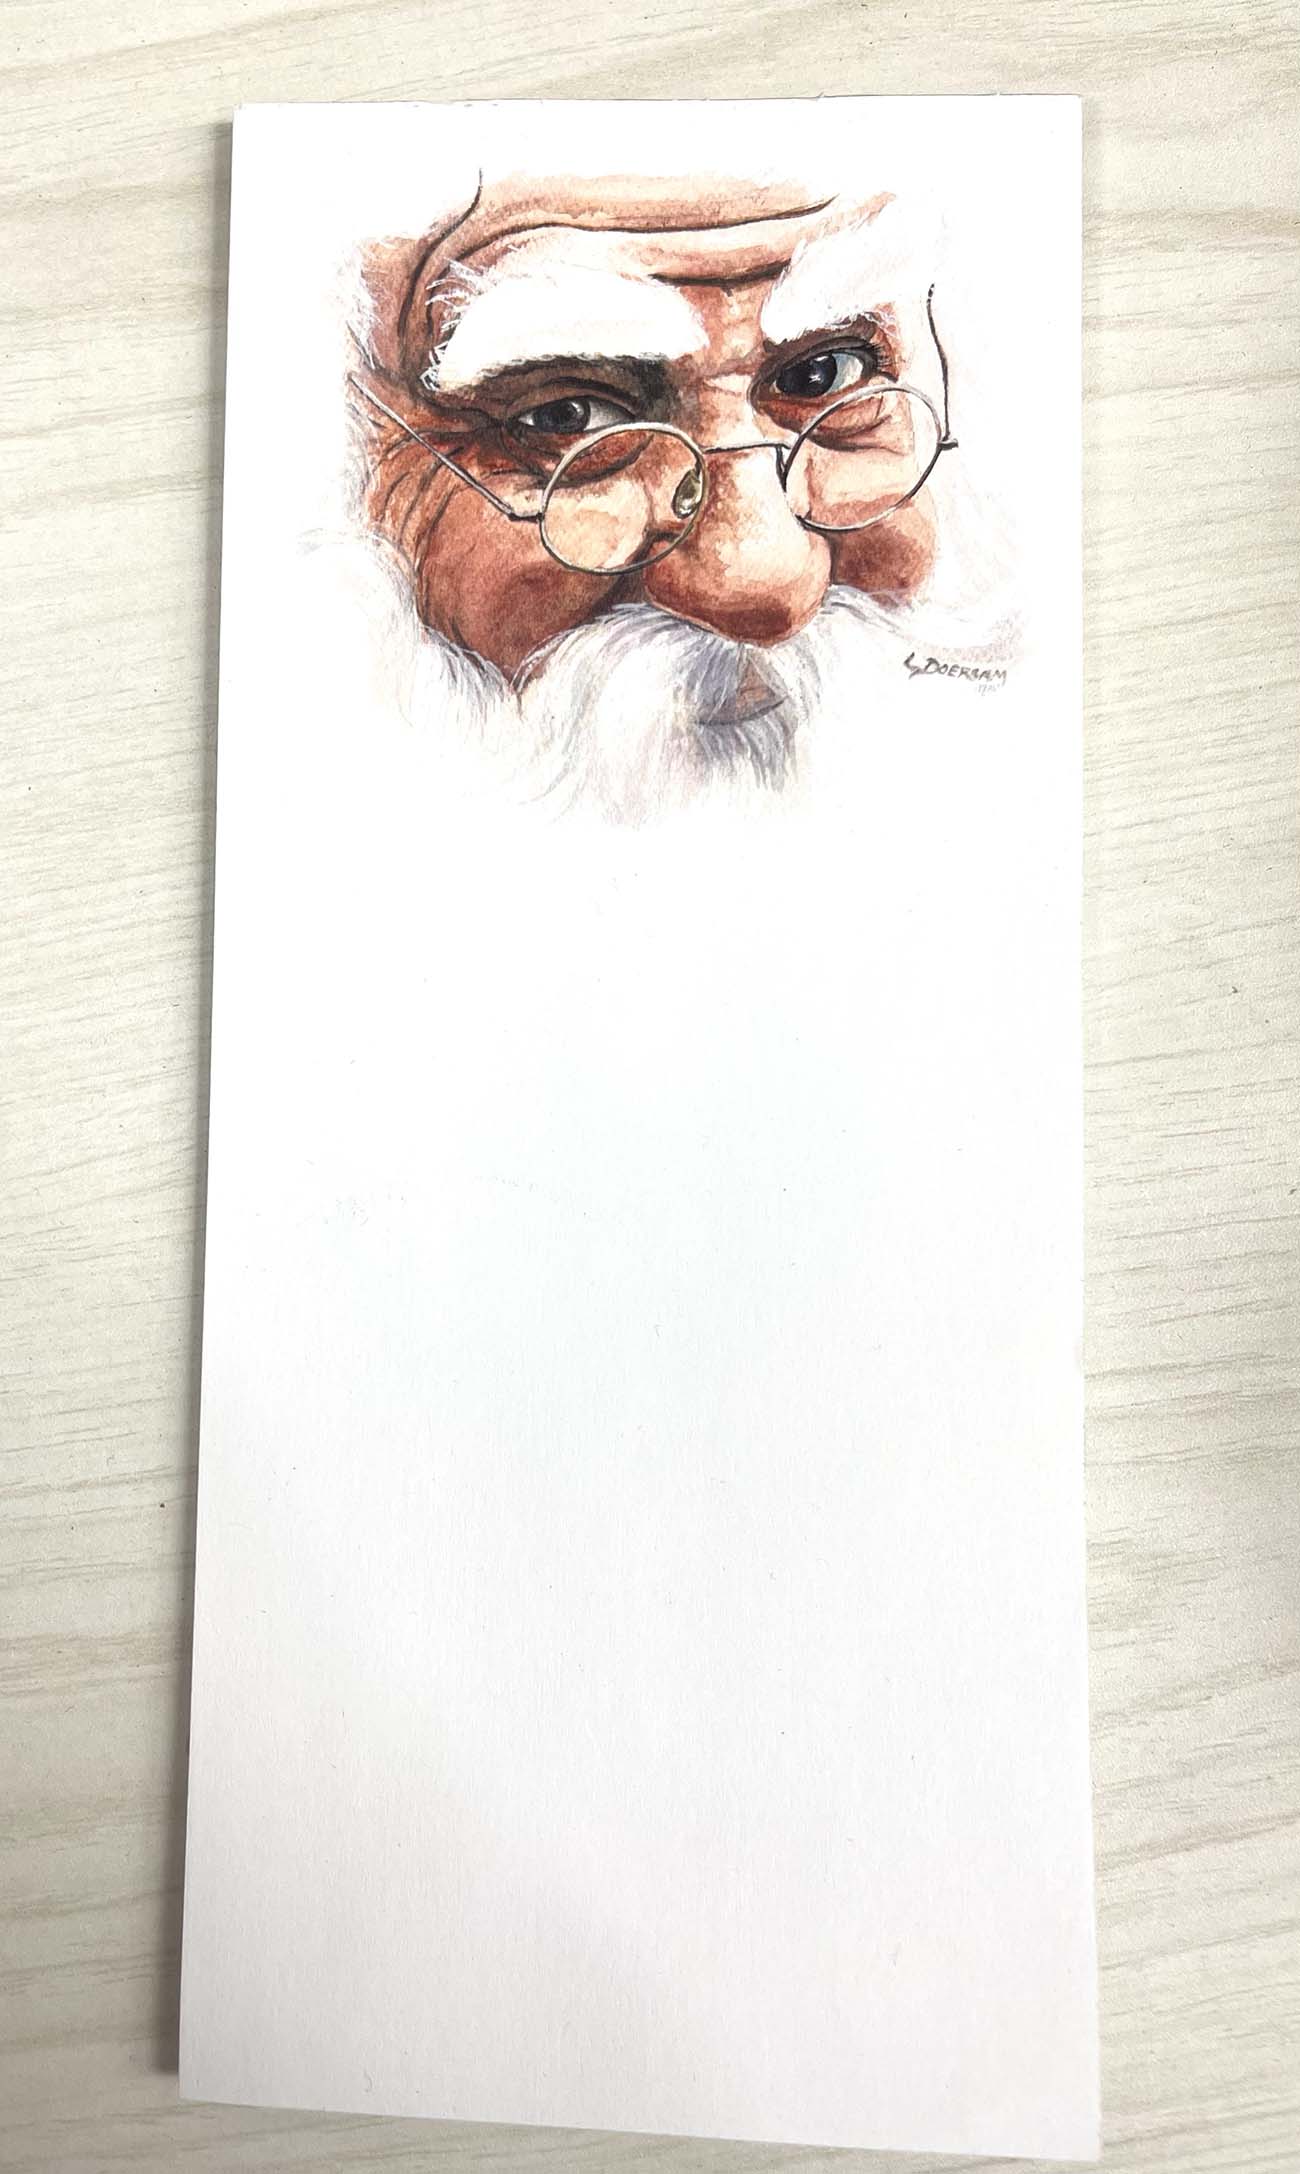 notepad that features a doodle of Santa Claus.